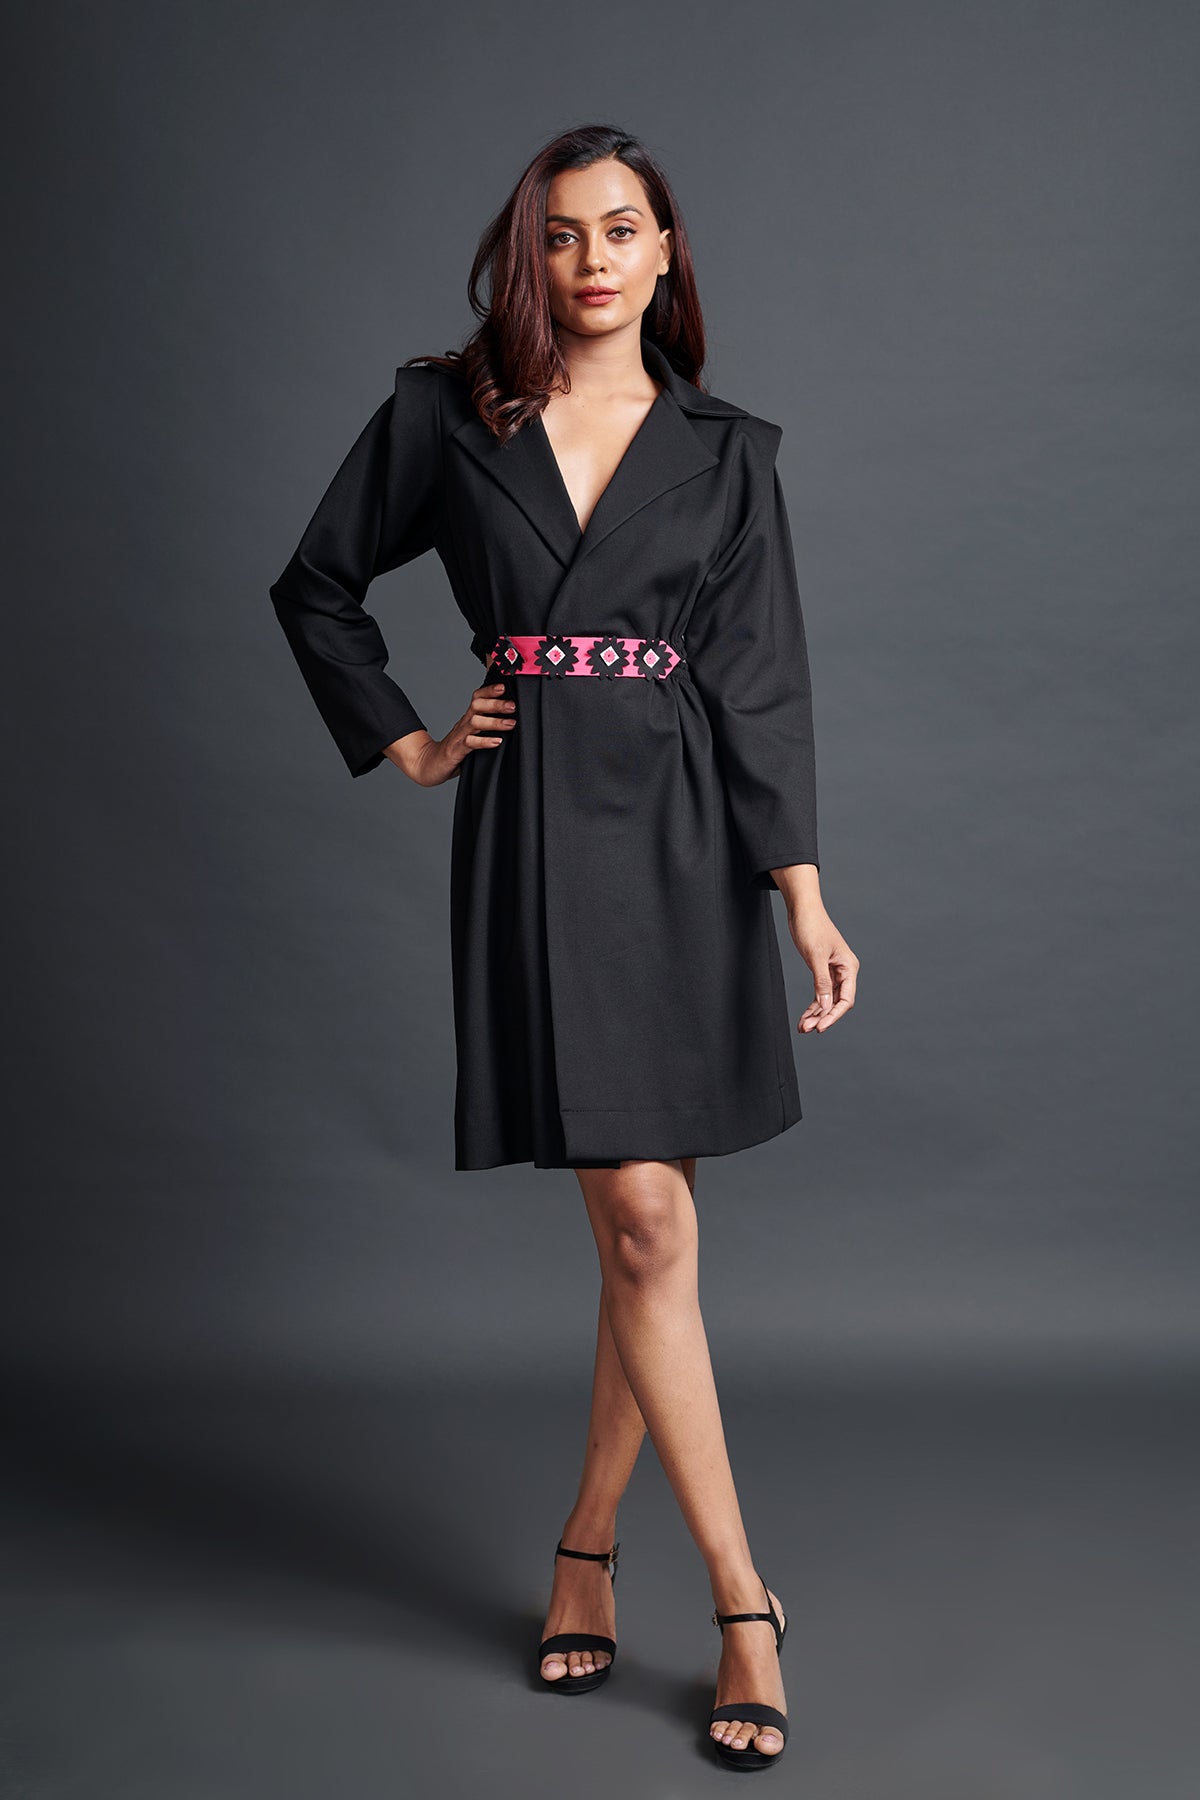 Image of BLACK SIDE CUT JACKET DRESS WITH NEON FLOWER BELT. From savoirfashions.com